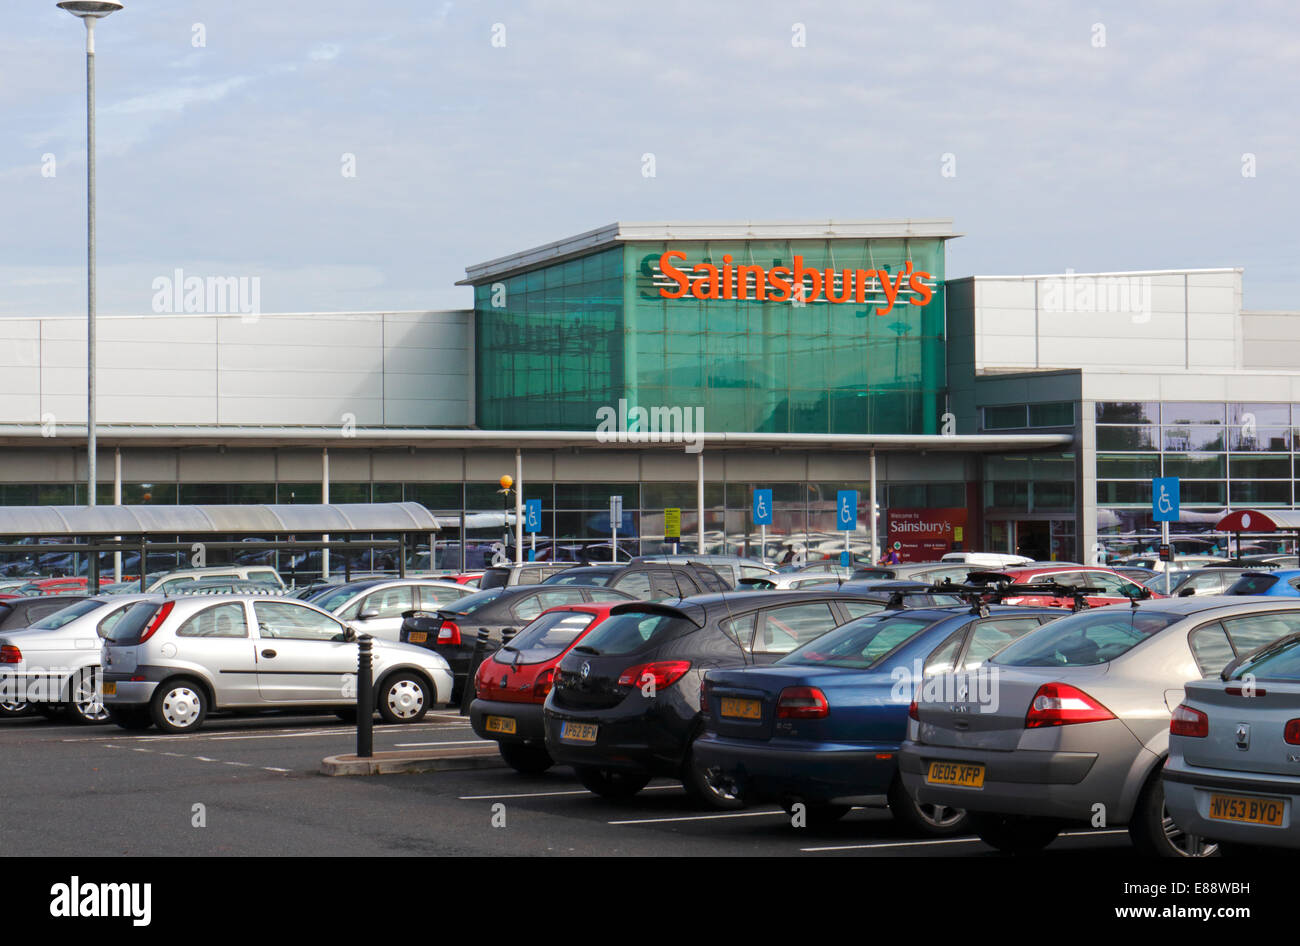 A view of Sainsbury's supermarket at Longwater Retail Park, Costessey, Norwich, Norfolk, England, United Kingdom. Stock Photo